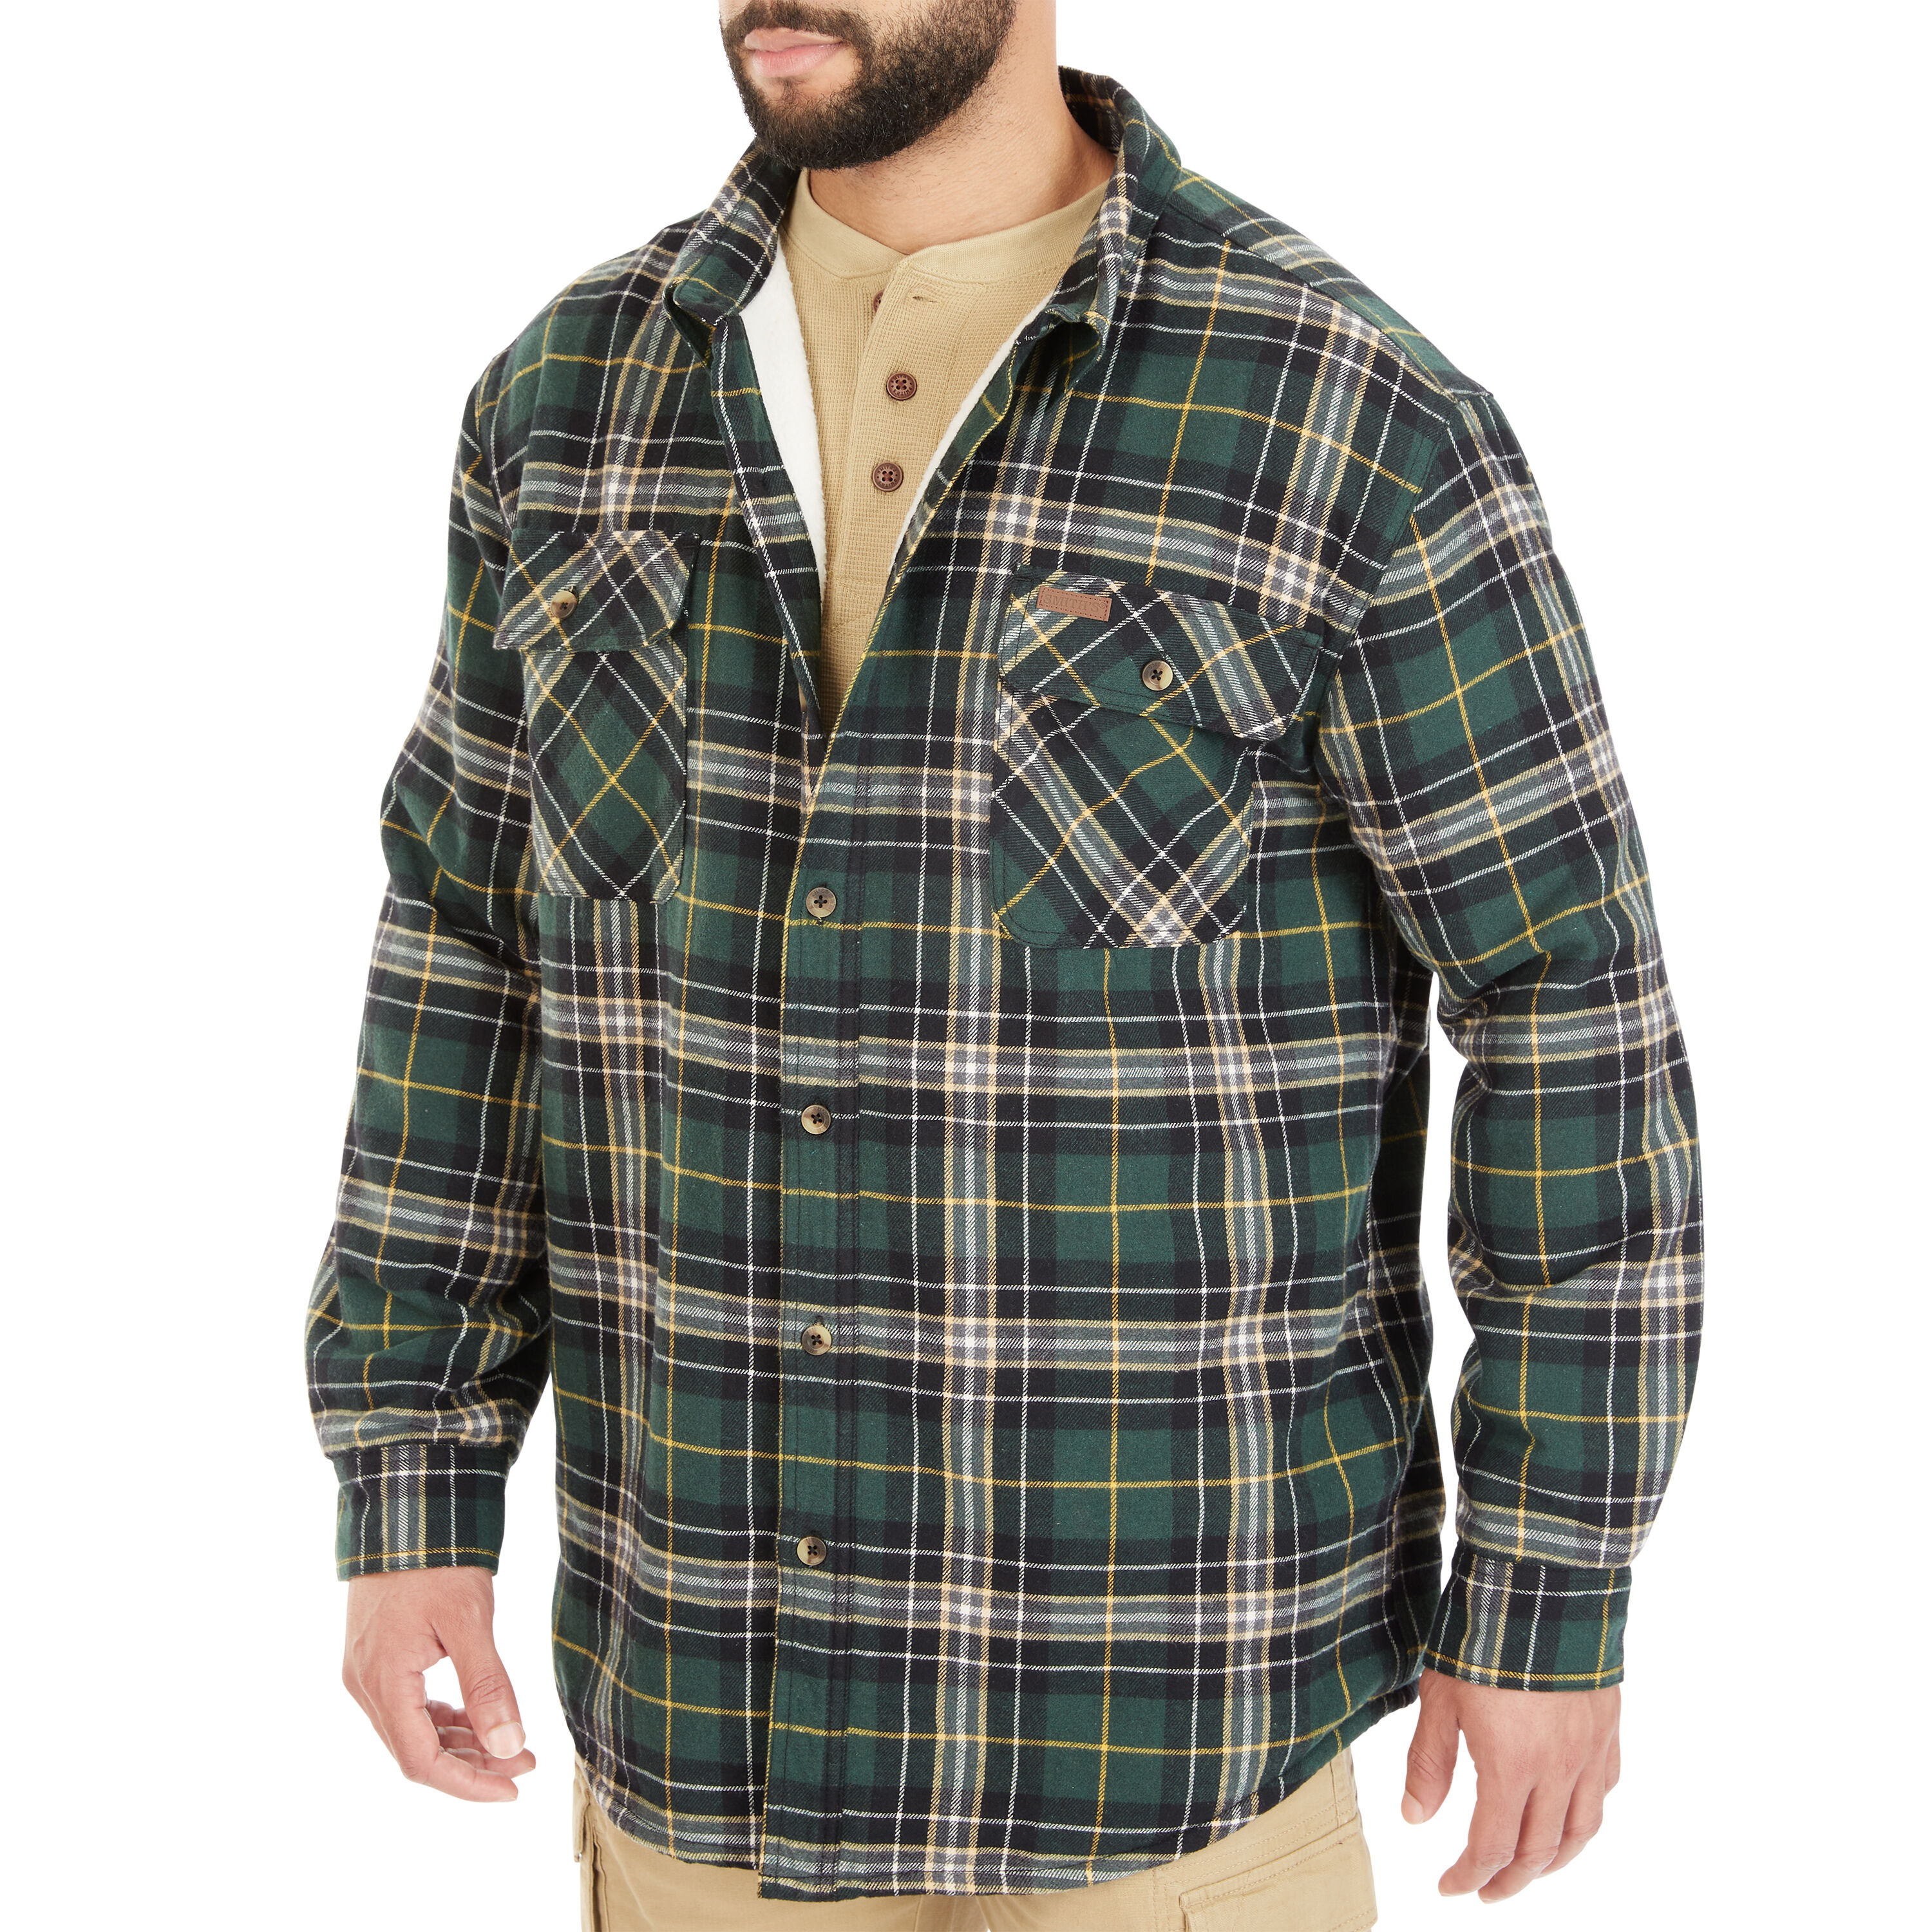 Smith's Workwear Sherpa-Lined Cotton Flannel Shirt Jacket in the